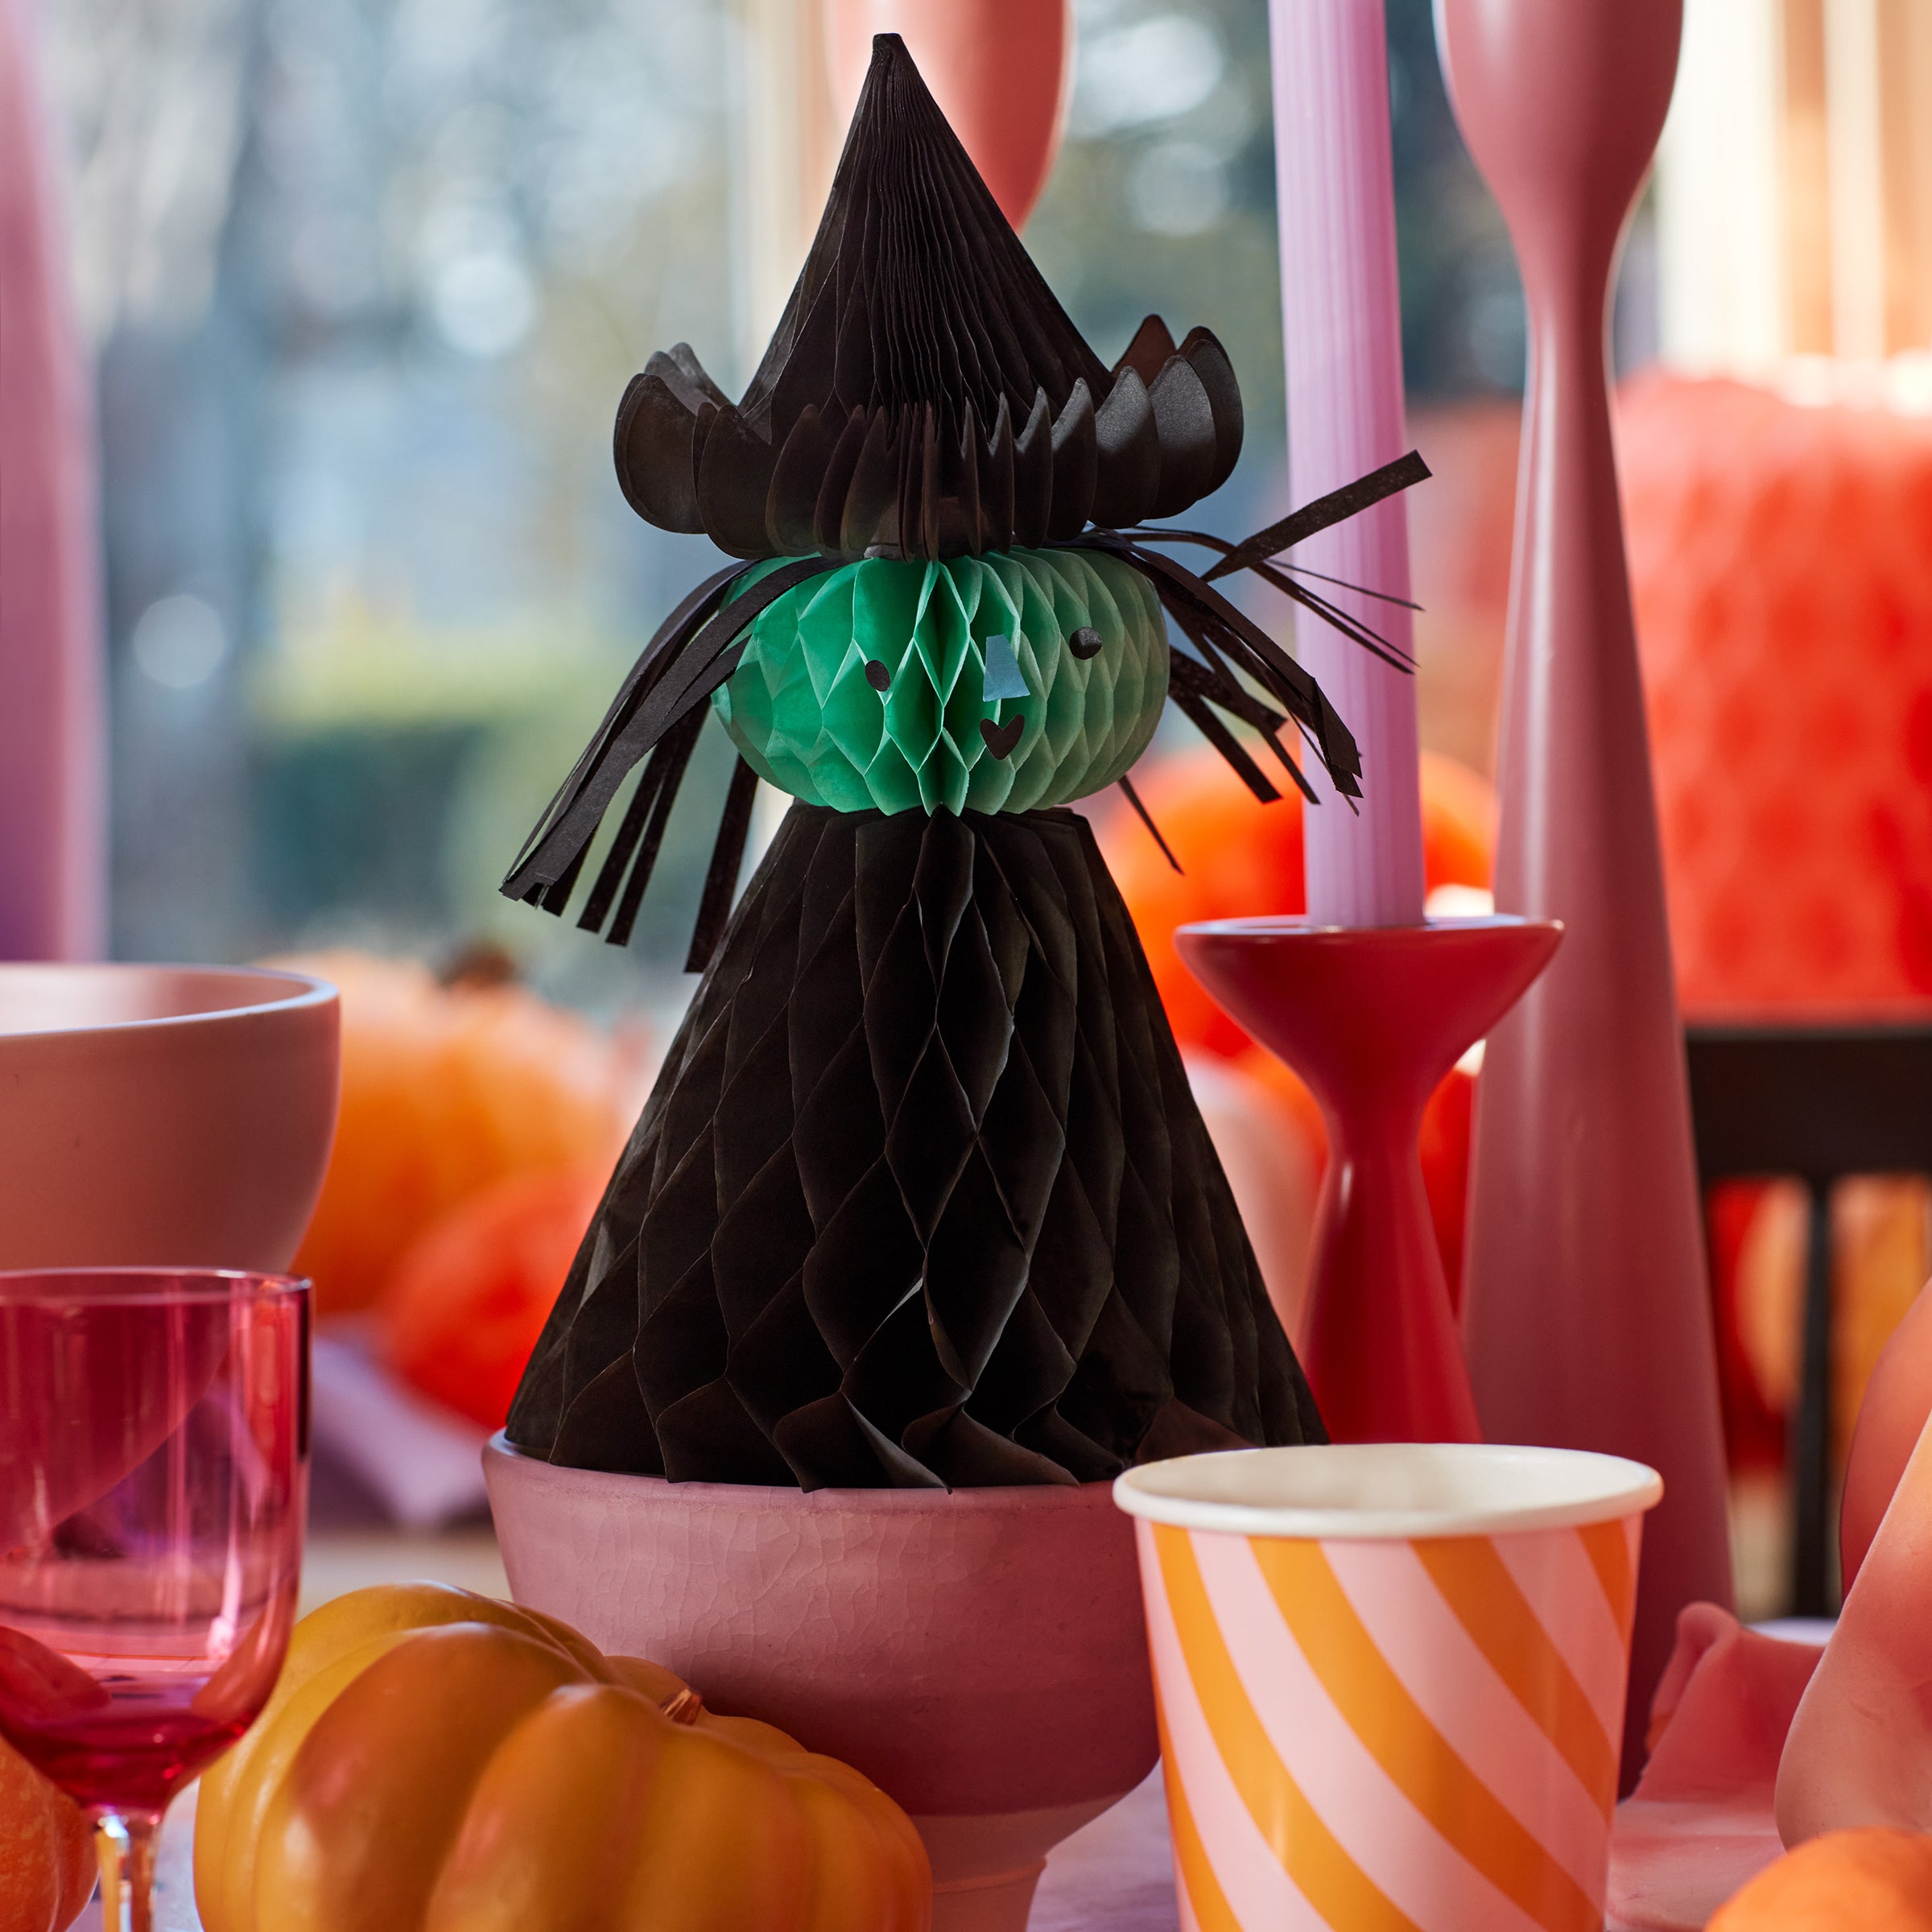 If you're looking for Halloween decoration ideas fill your table with our Halloween characters to impress your guests.